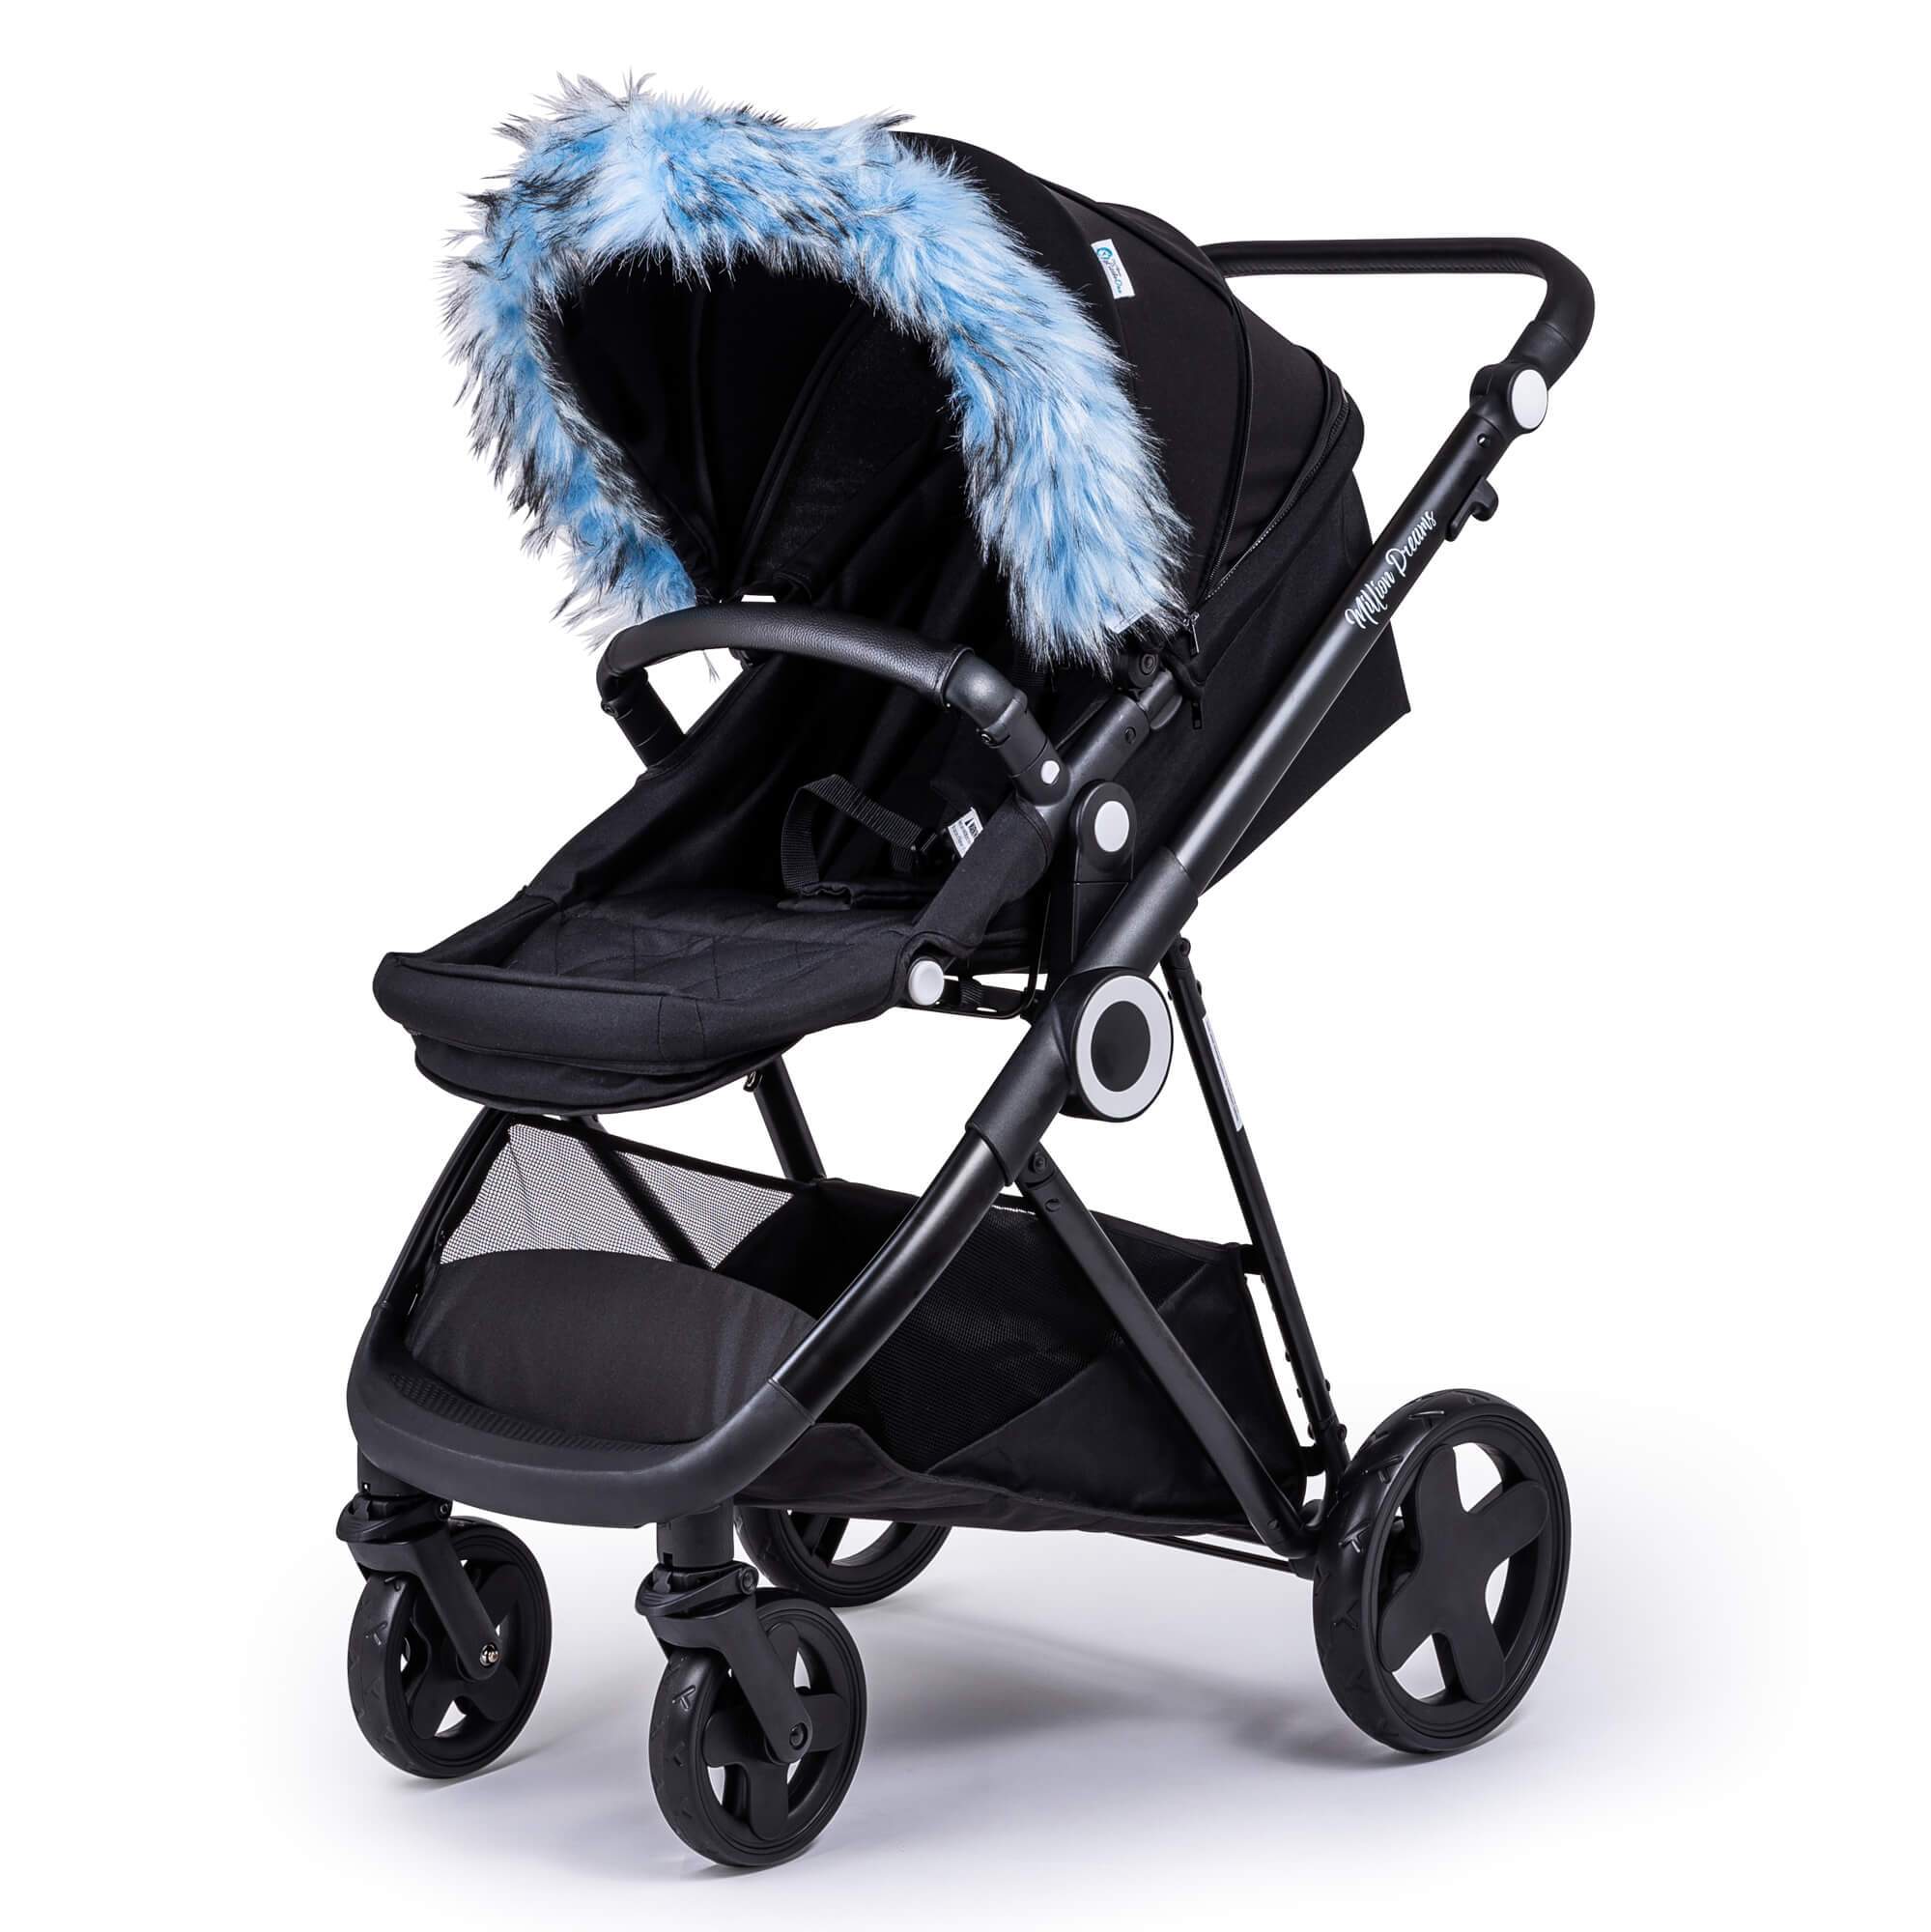 Pram Fur Hood Trim Attachment for Pushchair Compatible with Joie - Light Blue / Fits All Models | For Your Little One